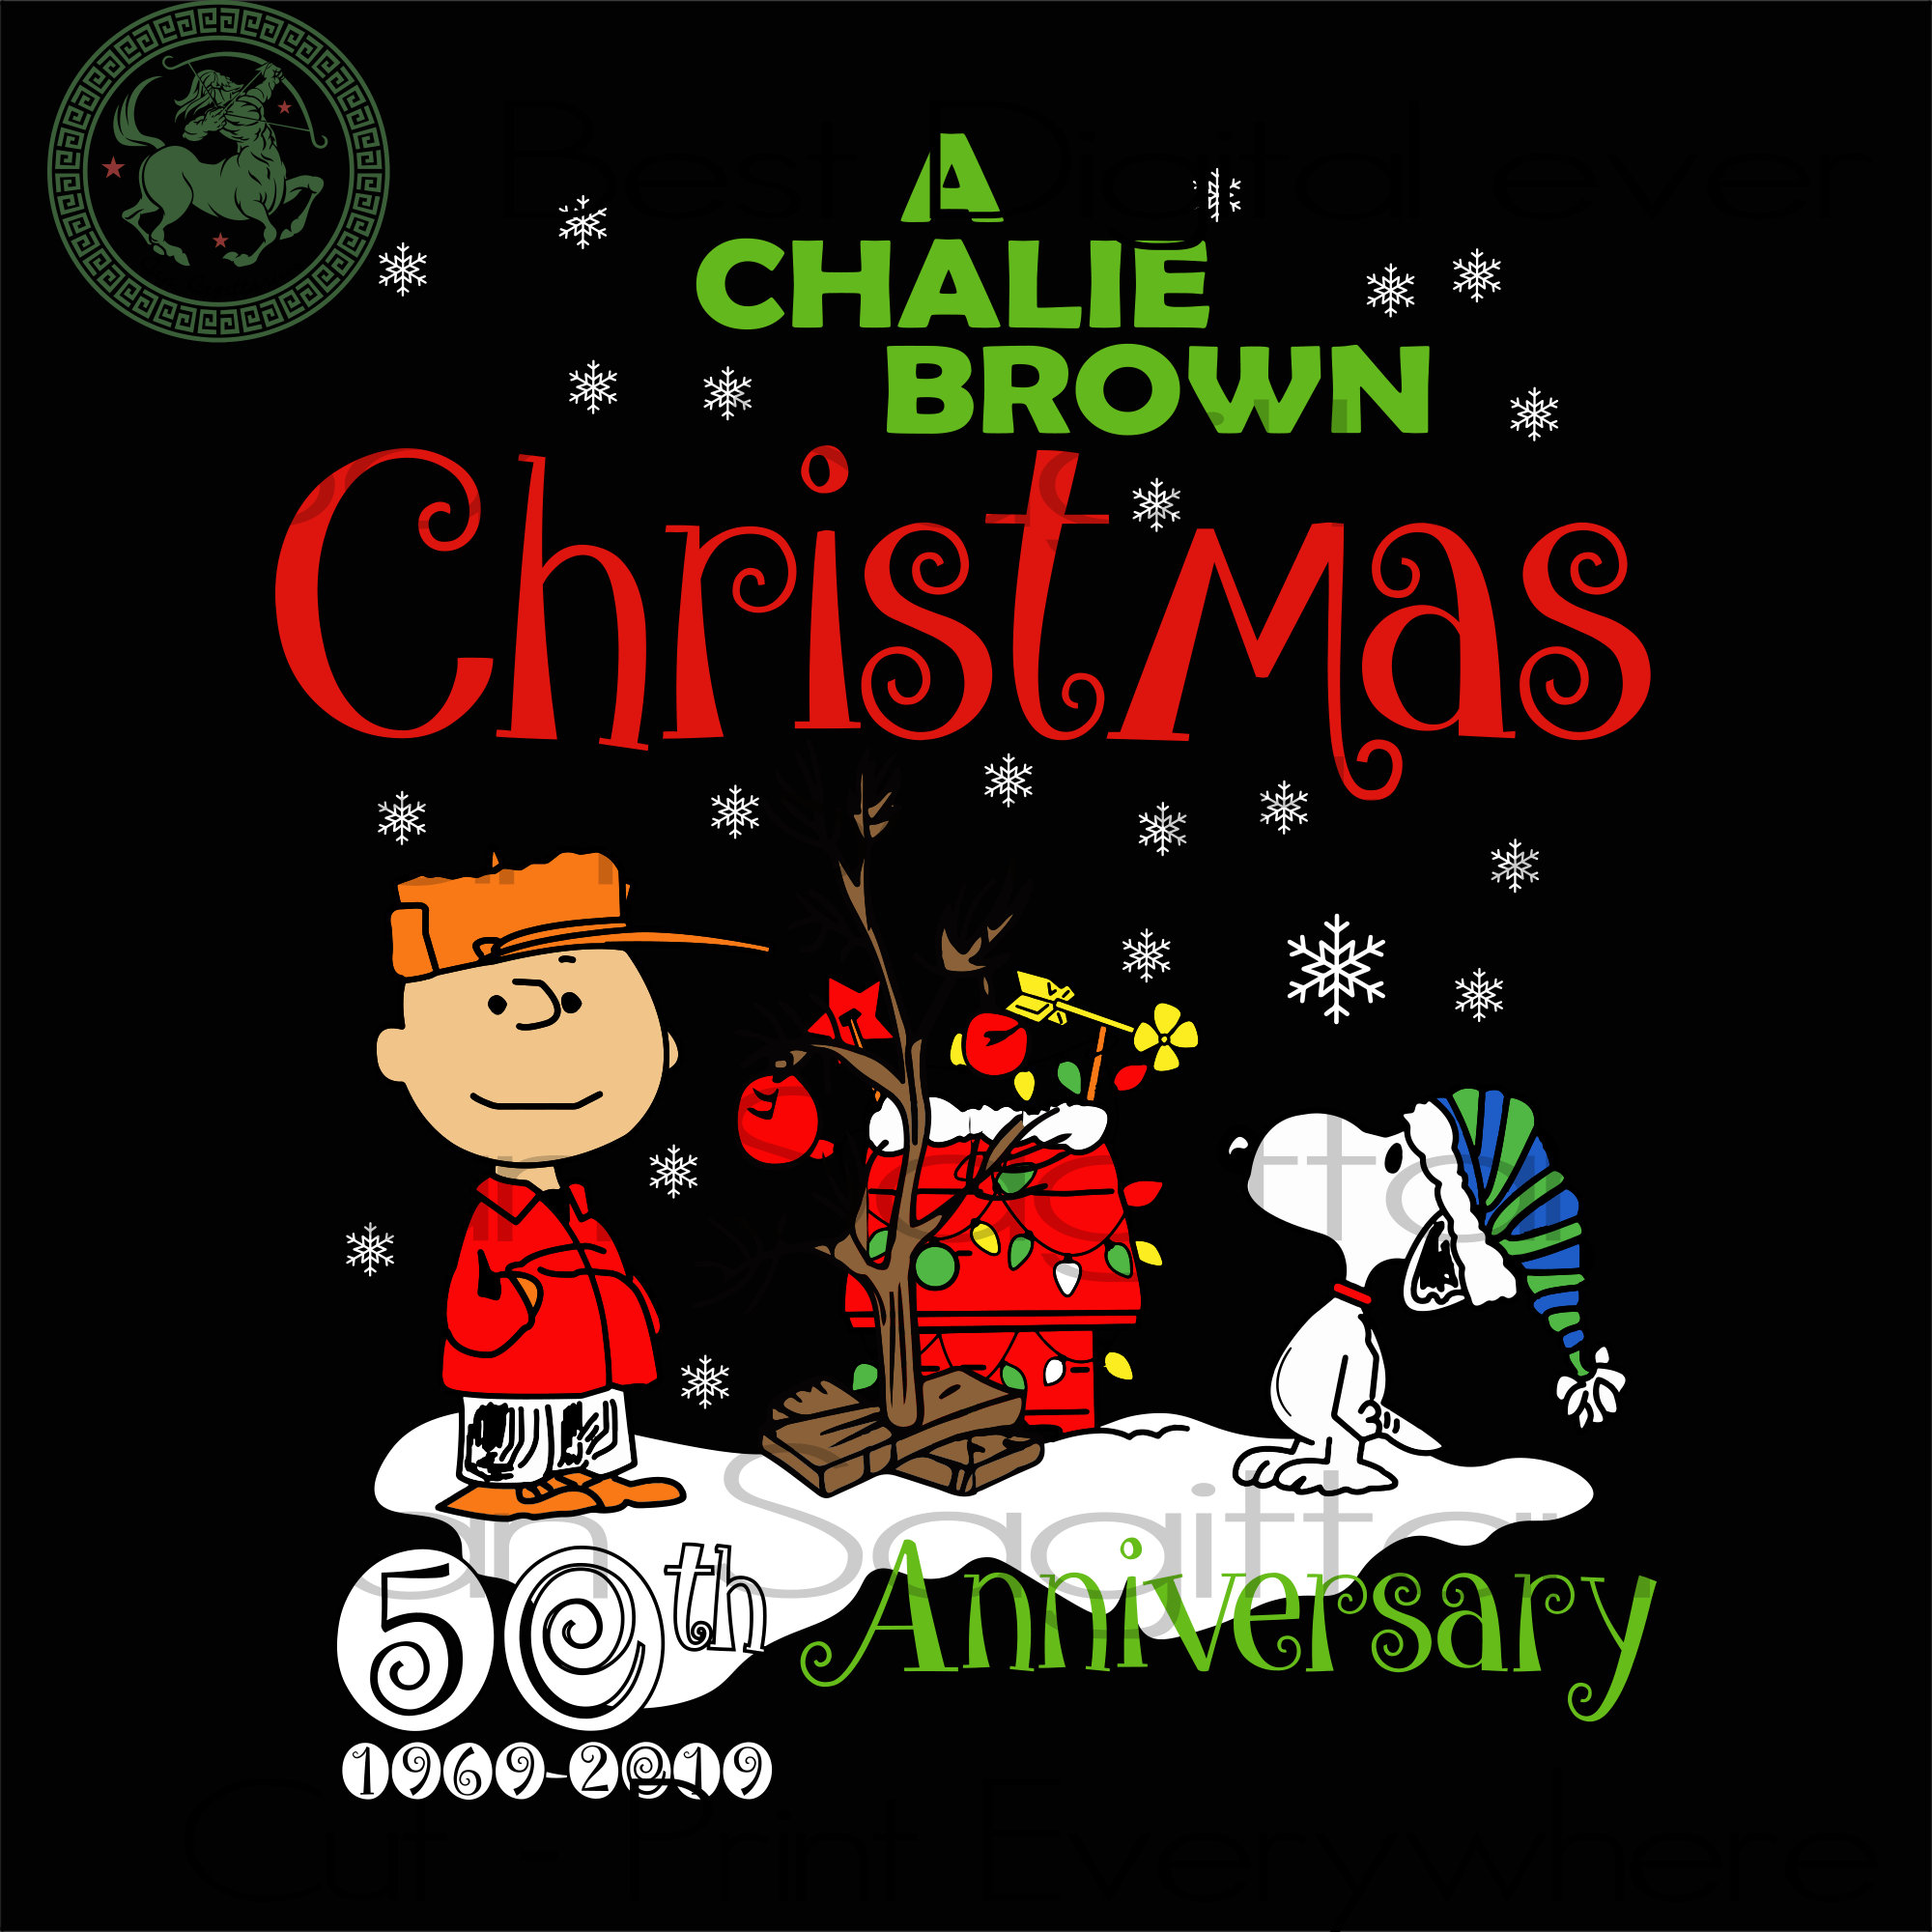 Download A charlie brown christmas 50th anniversary SVG Files For ...